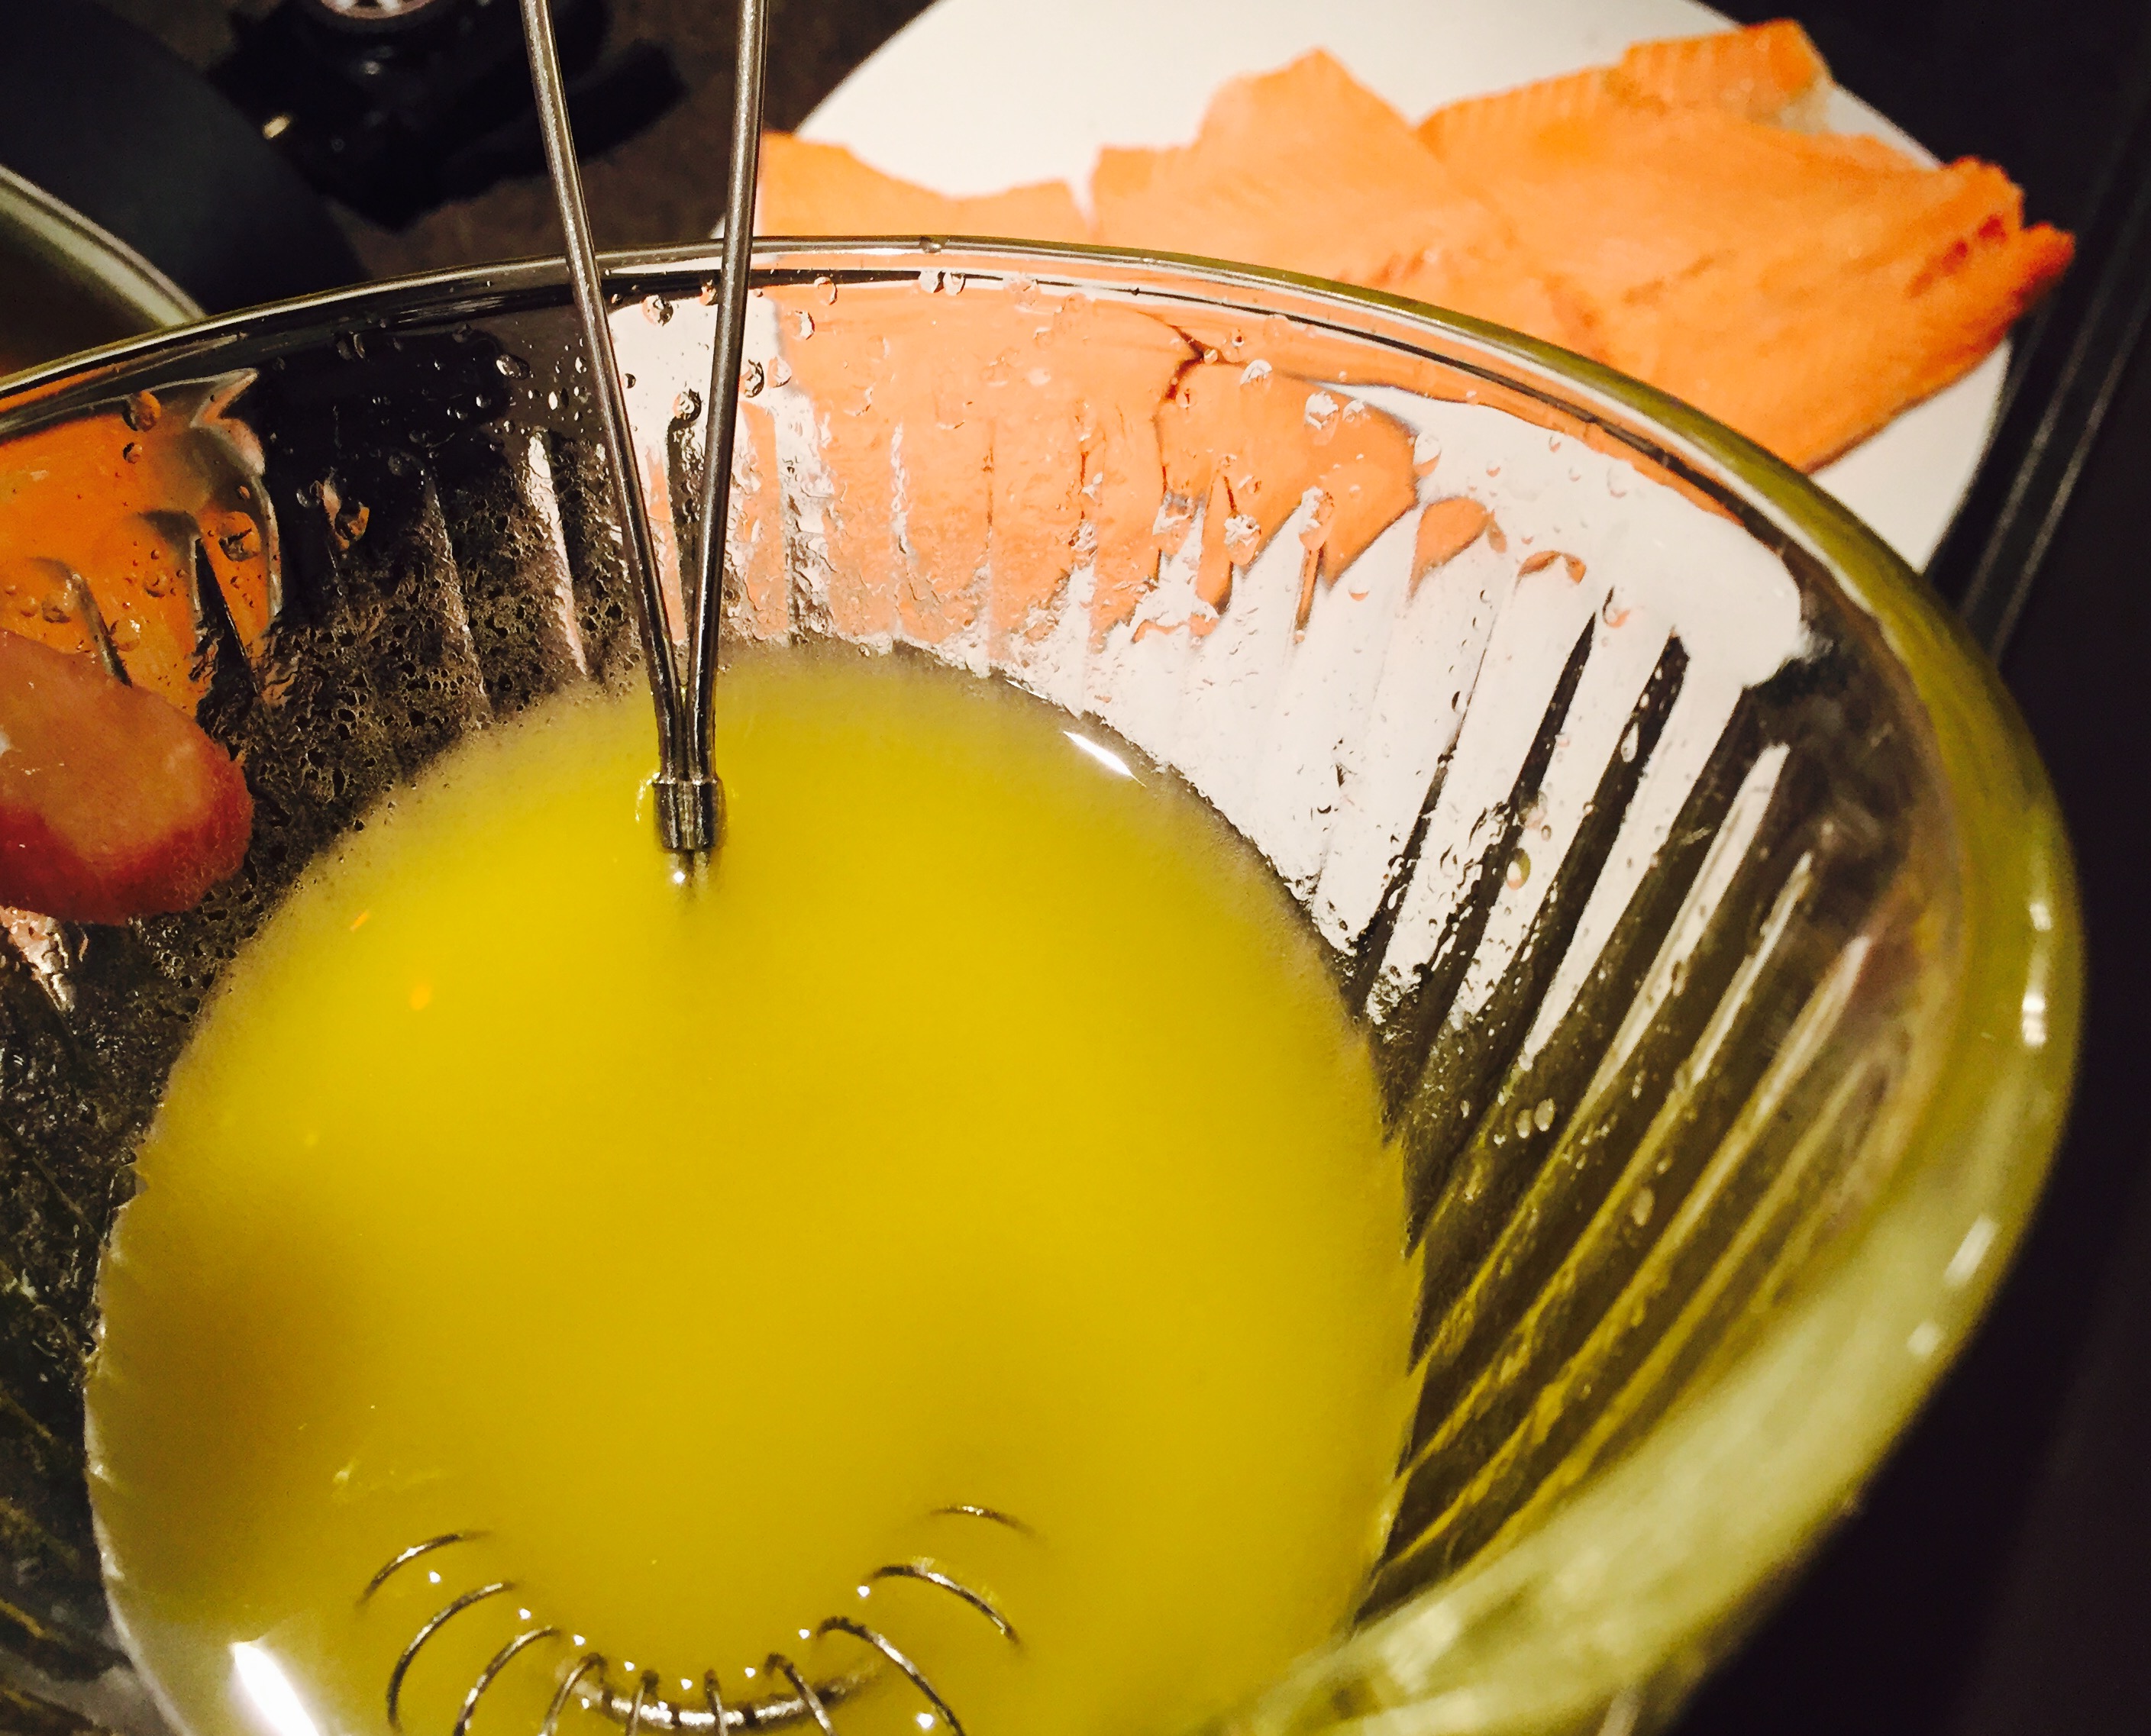 Vinaigrette from poaching liquid whisked with good olive oil ... magic